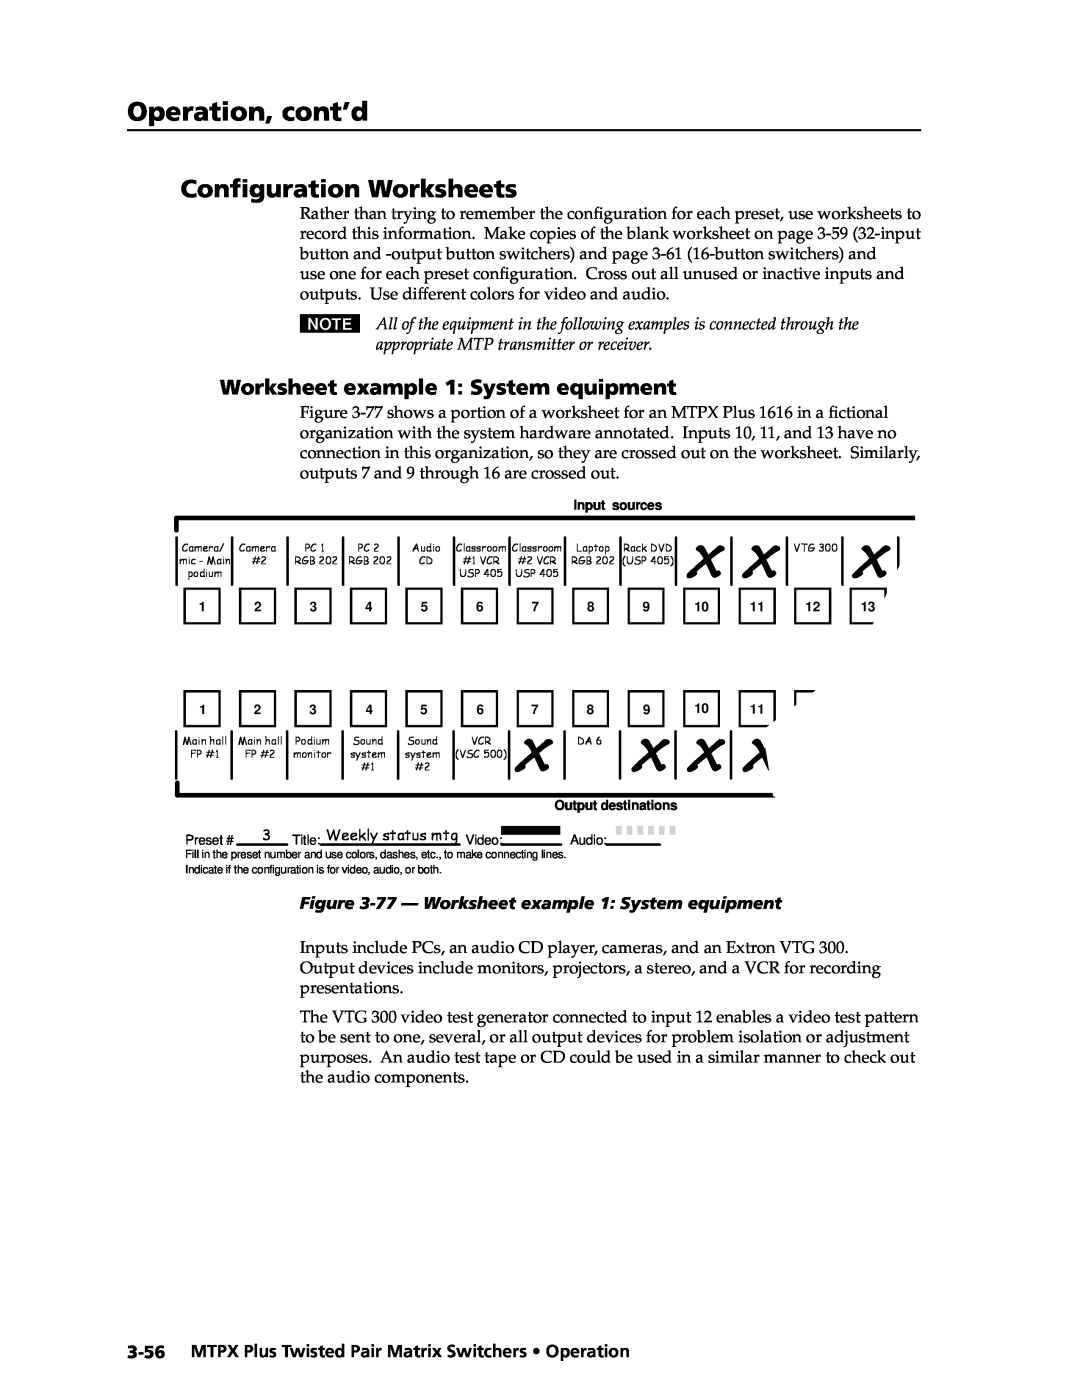 Extron electronic MTPX Plus Series manual Configuration Worksheets, Worksheet example 1 System equipment, Operation, cont’d 